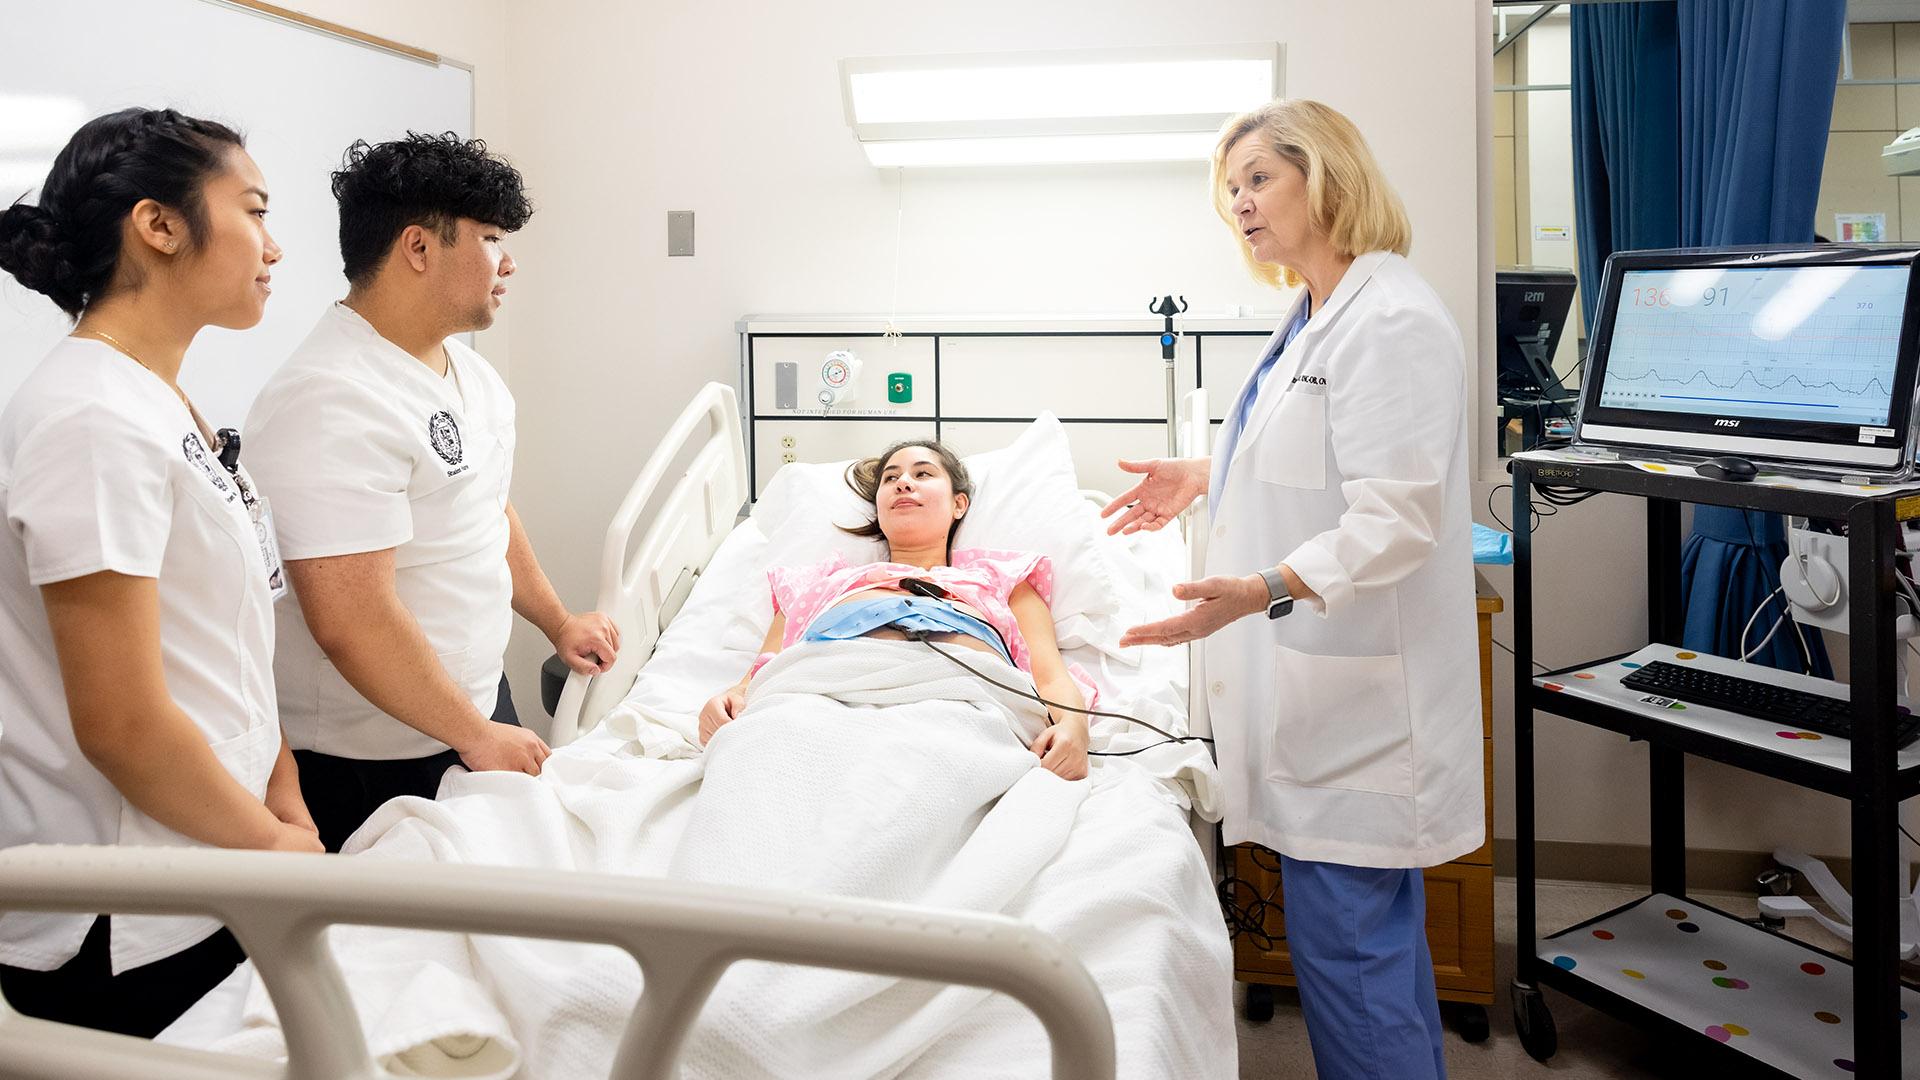 Students in the CSULB Nursing School conduct a mock examination of a patient.